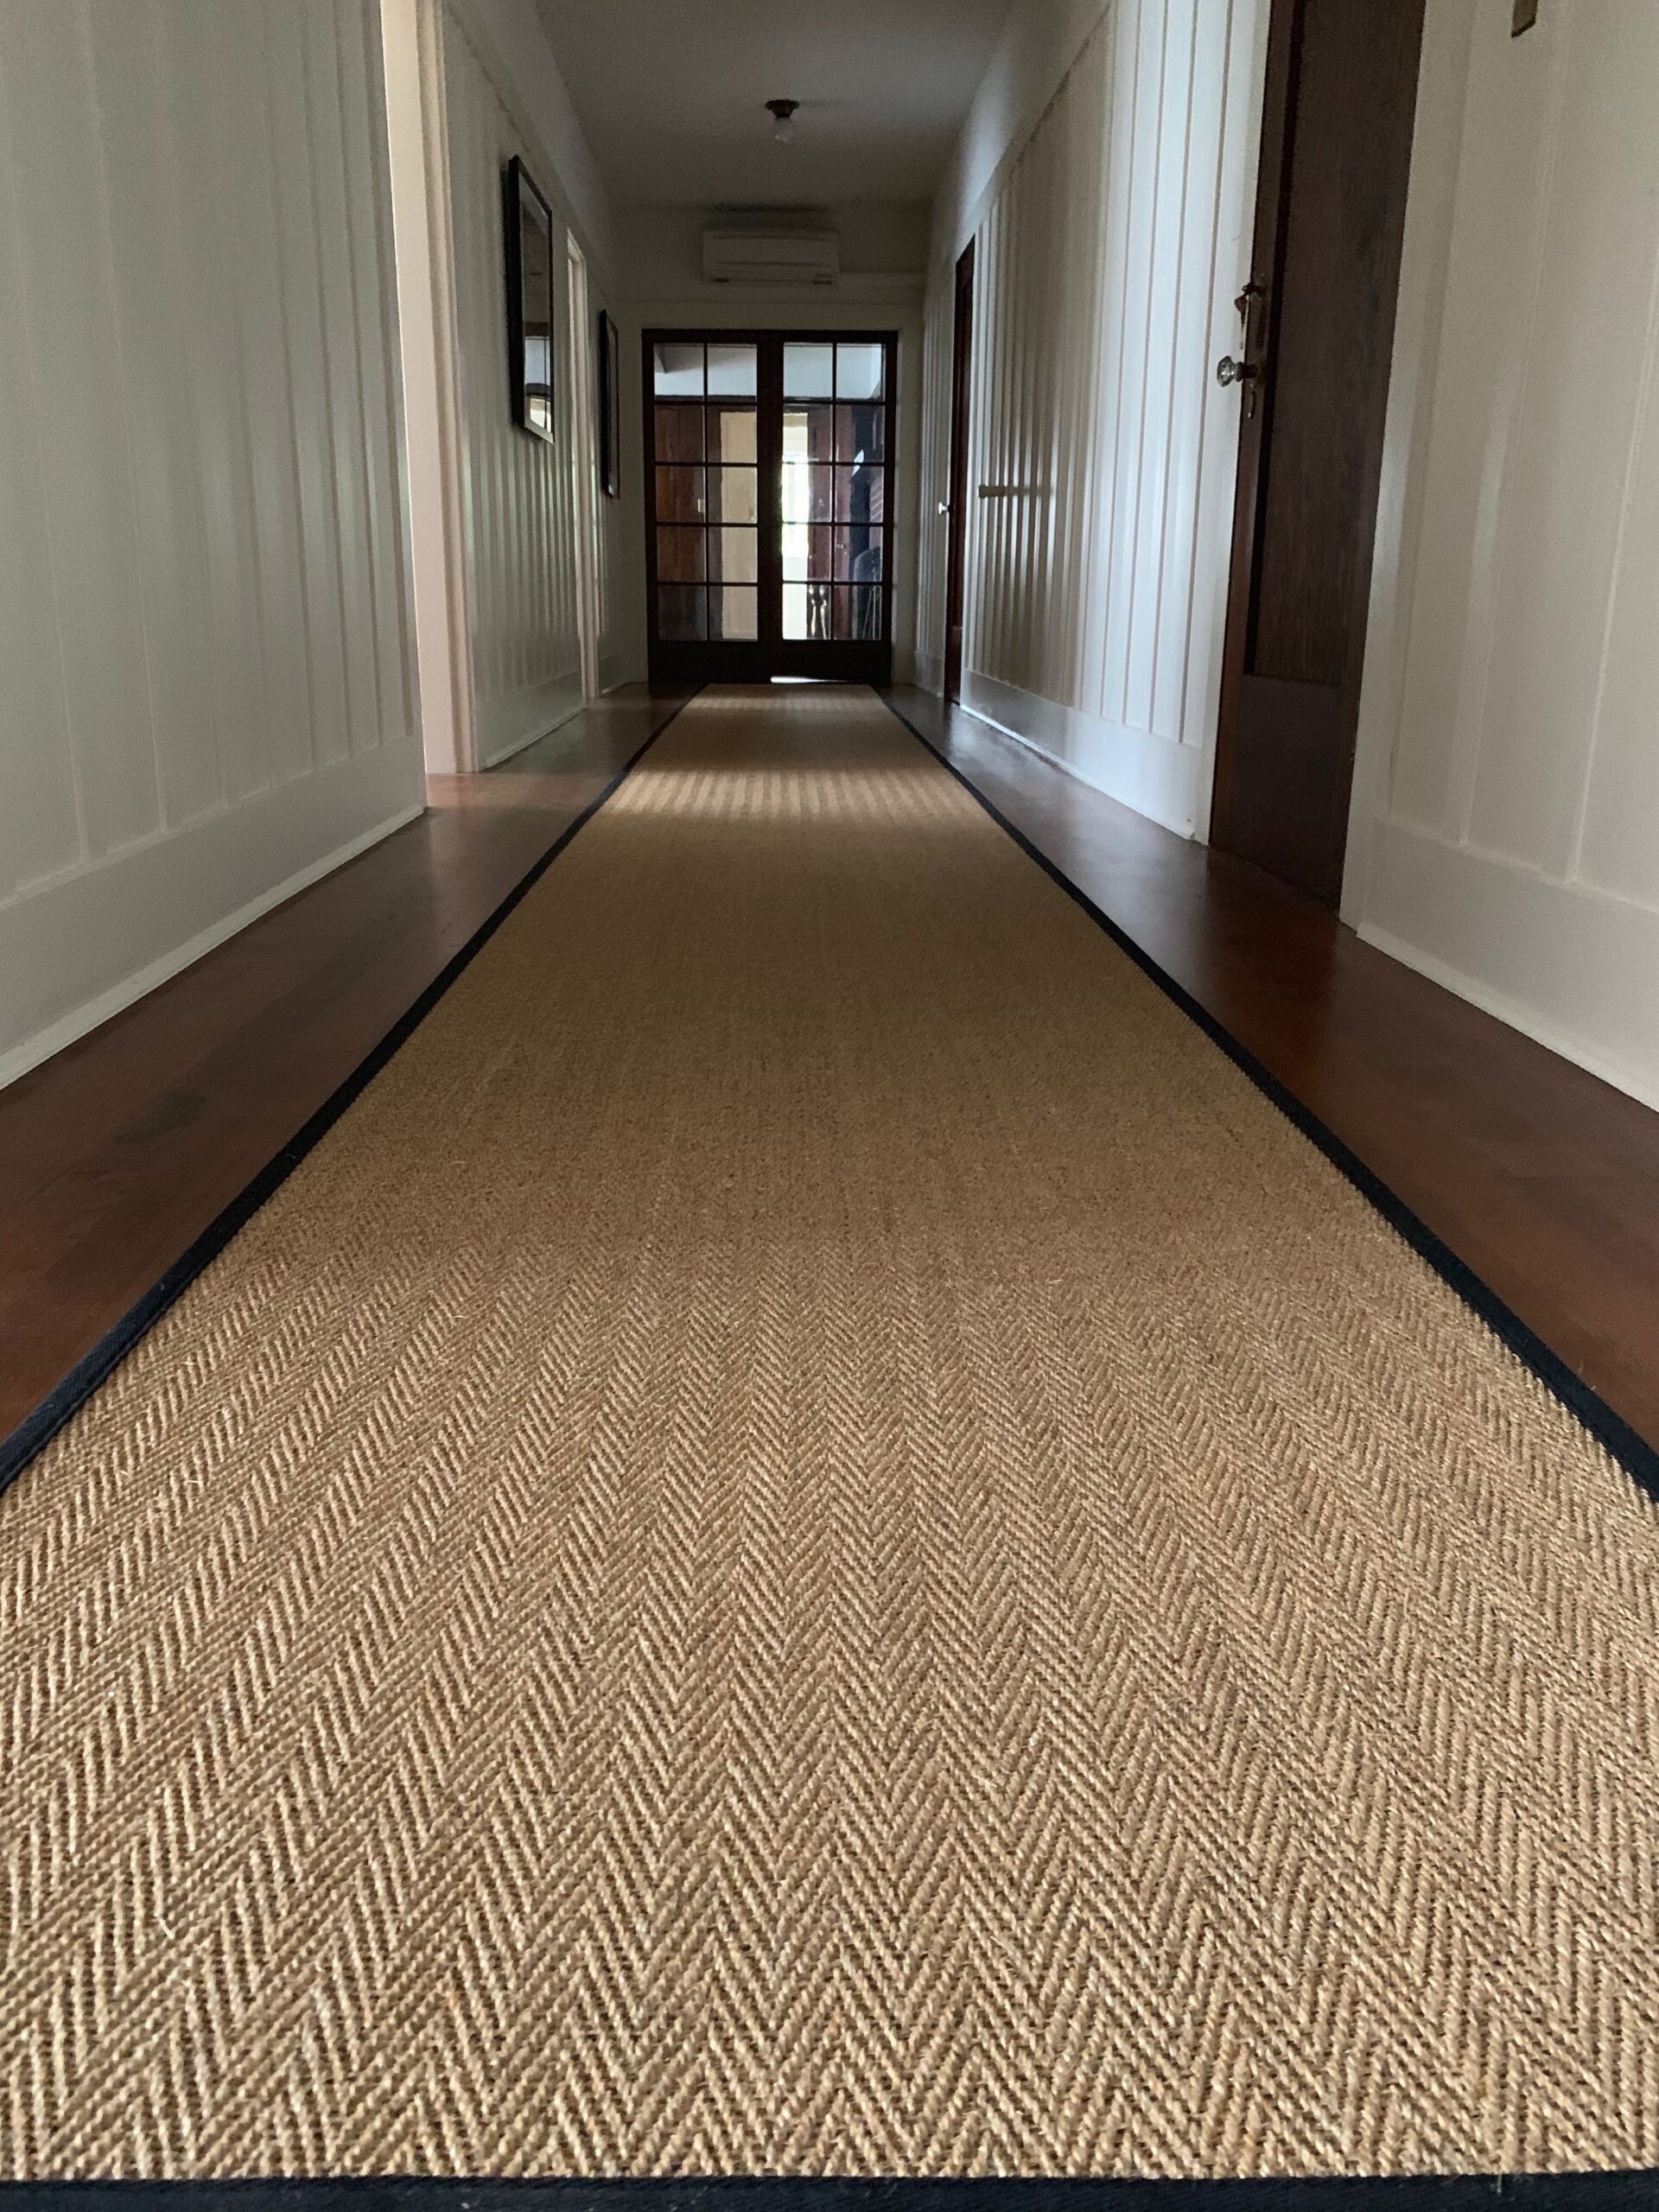 Hall Runners – Adding a Finishing Touch